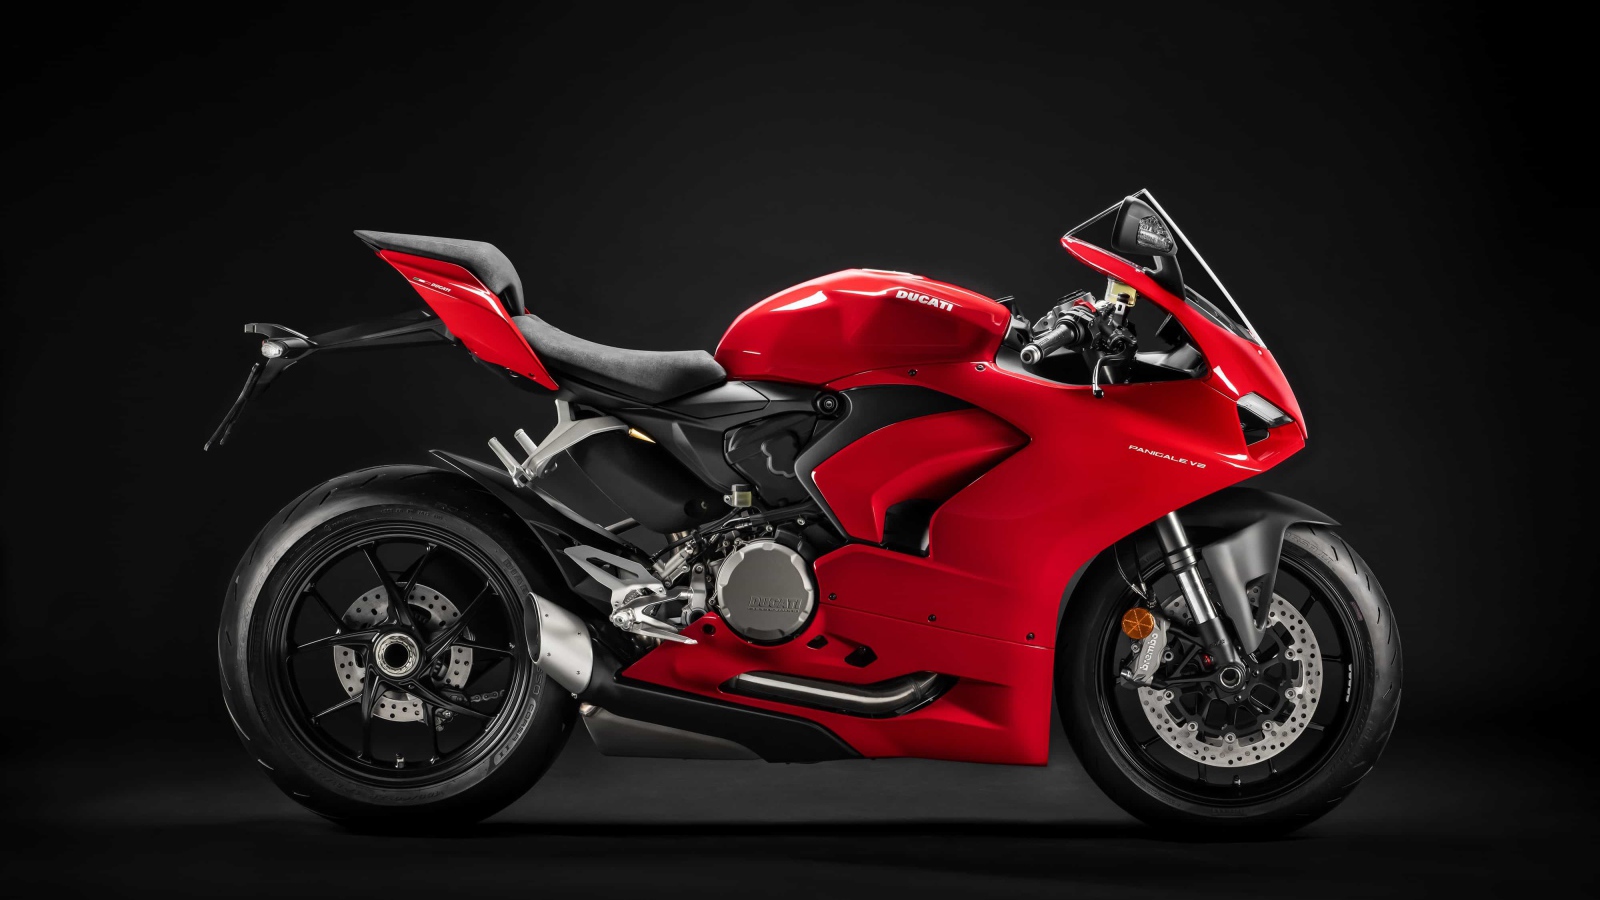 Red motorcycle Ducati Panigale v2, 2020 on a black background